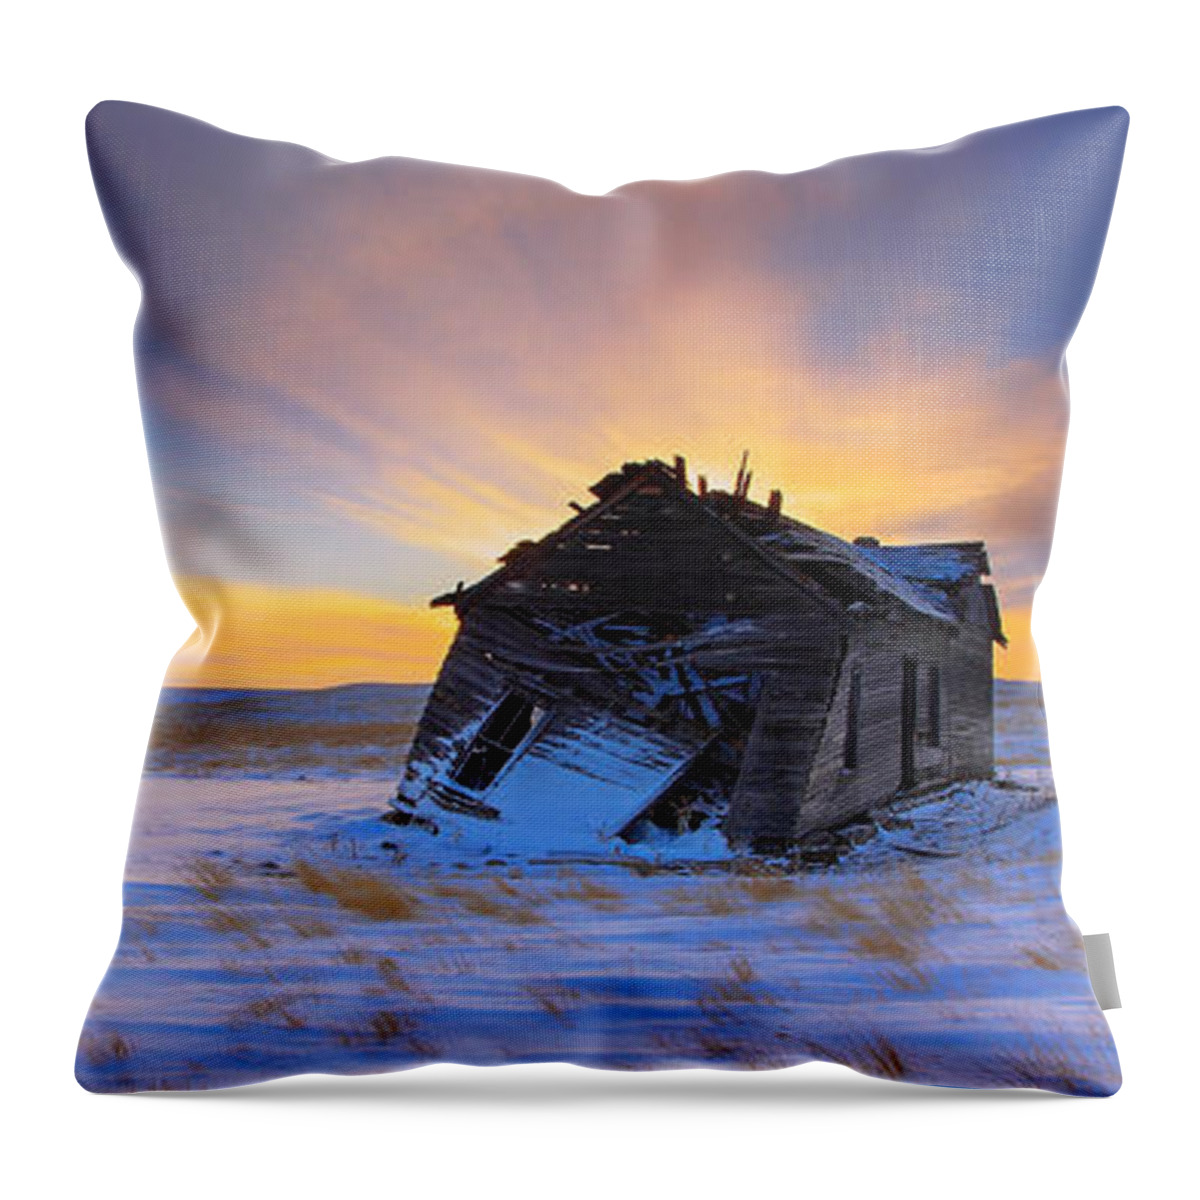 Old Barn Throw Pillow featuring the photograph Old Glow by Kadek Susanto